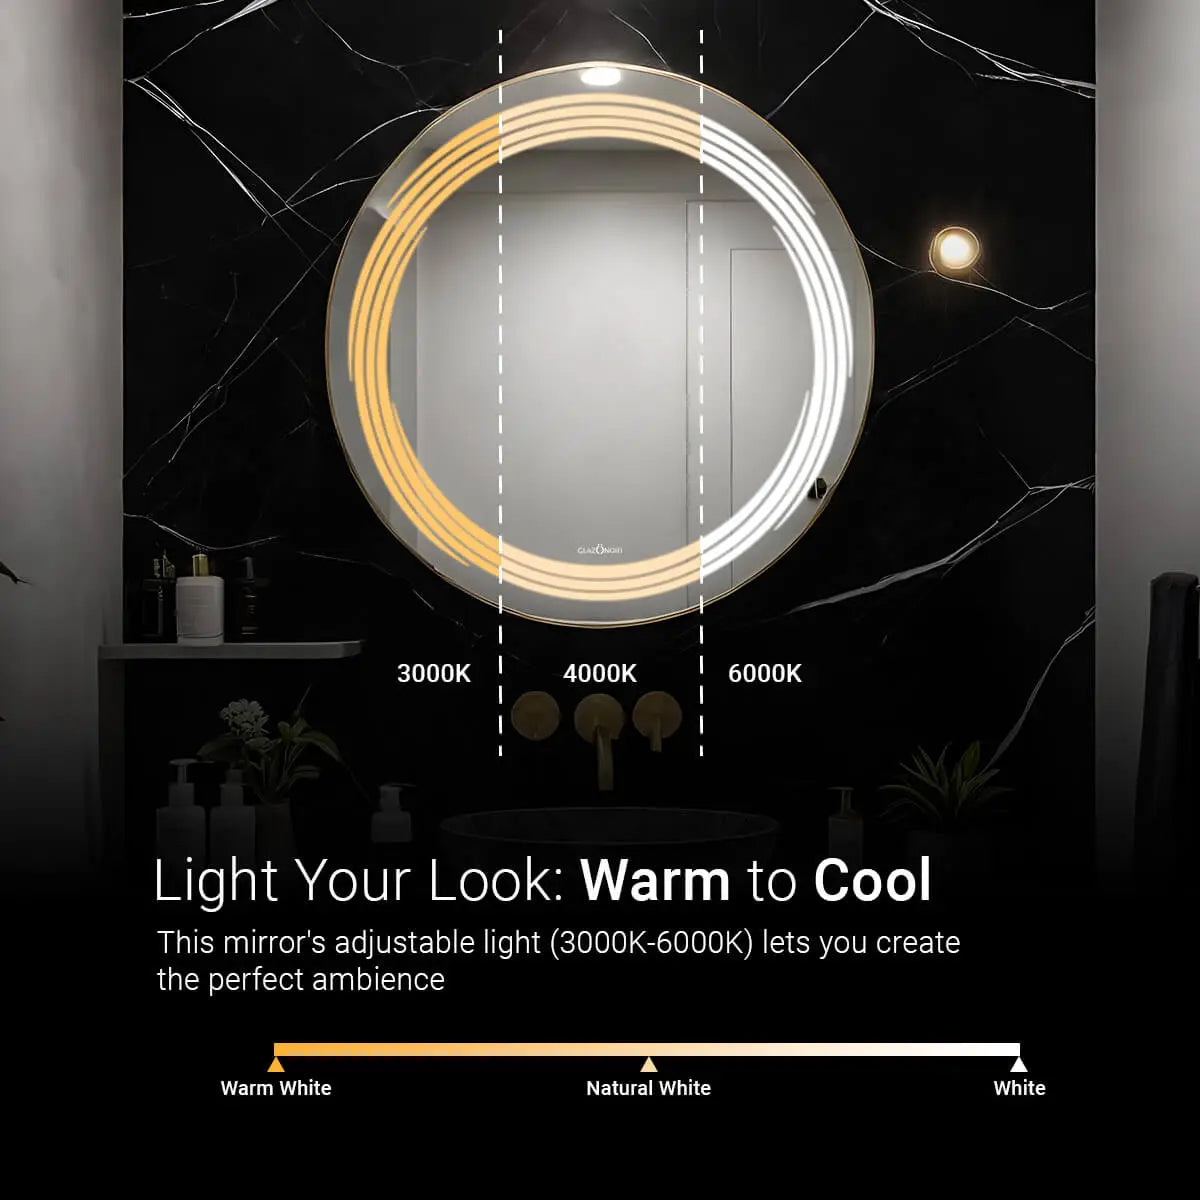 Wall-mounted, round bathroom mirror with a brushed metal frame. This mirror is perfect for any bathroom and provides a clear reflection. It depicts about the different temperatures of light that it can be switched to.